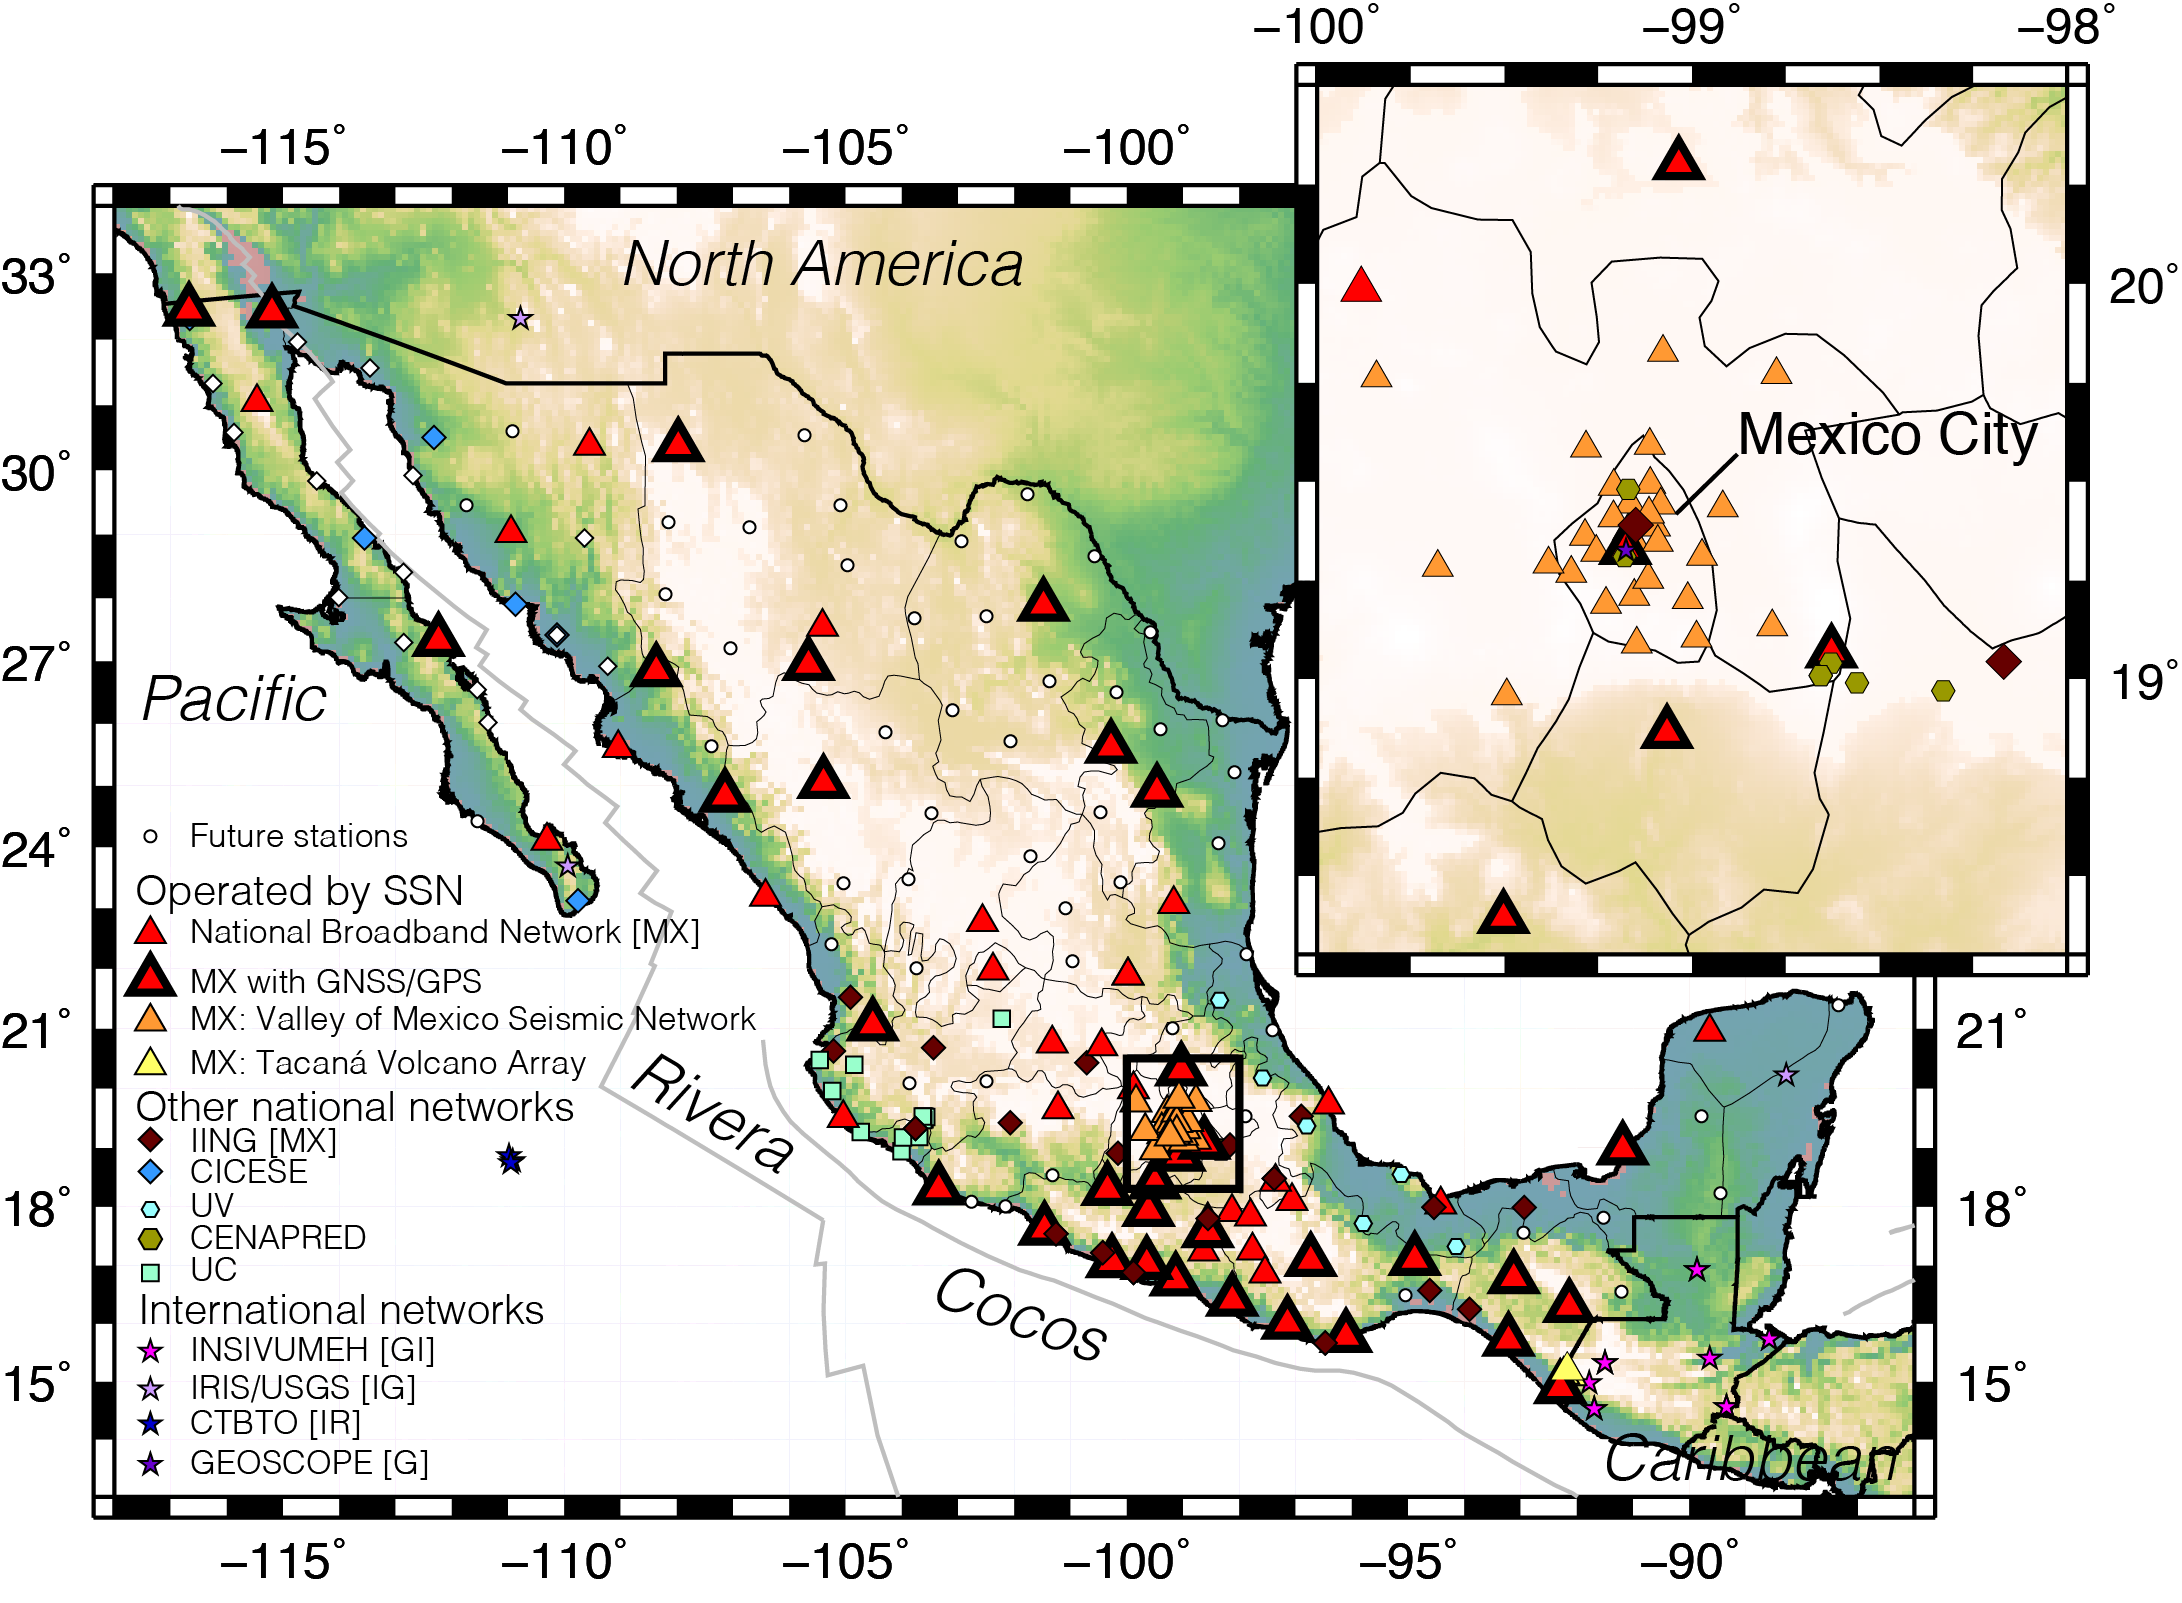 Stations that contribute with data to the location of earthquakes within Mexico.